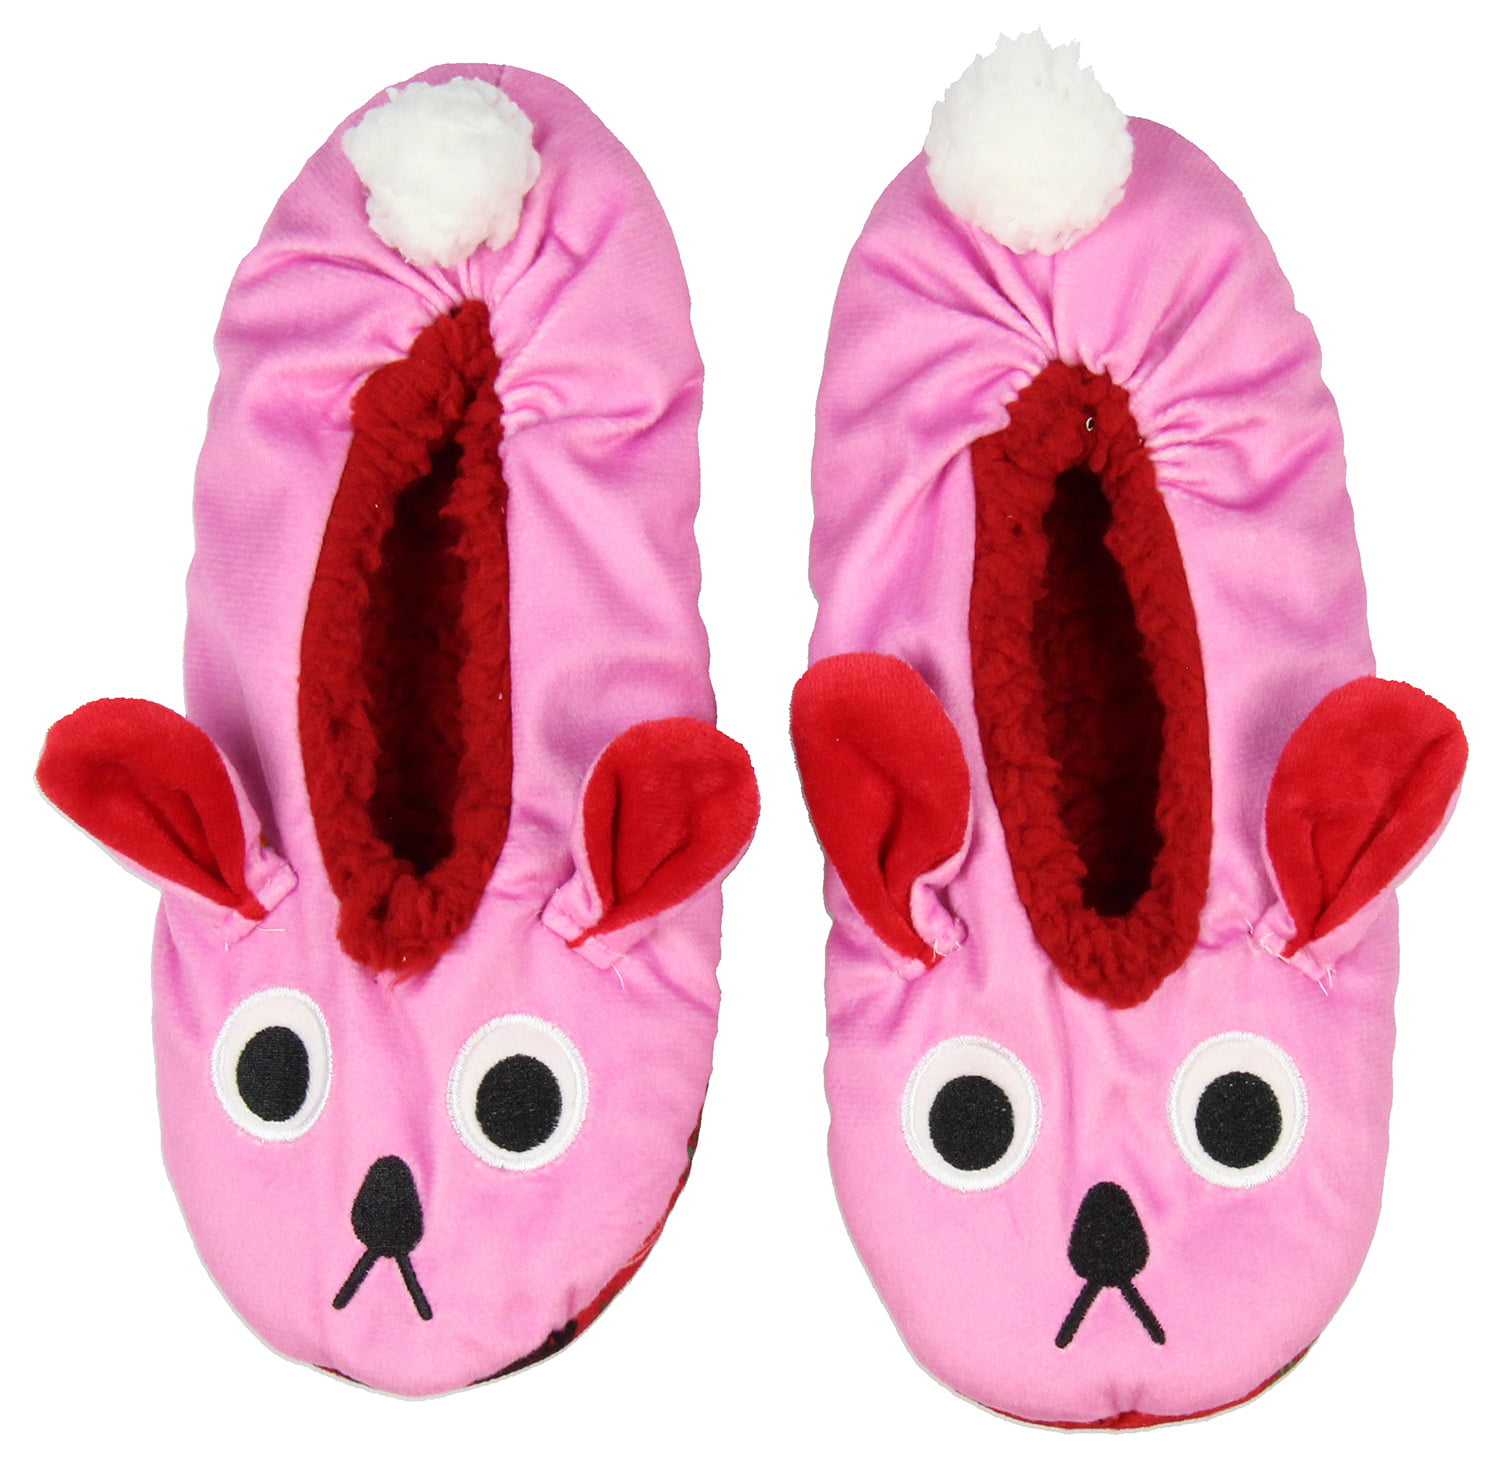 A Christmas Pink Bunny Slippers with No-Slip Sole For Women Men (Large) - Walmart.com